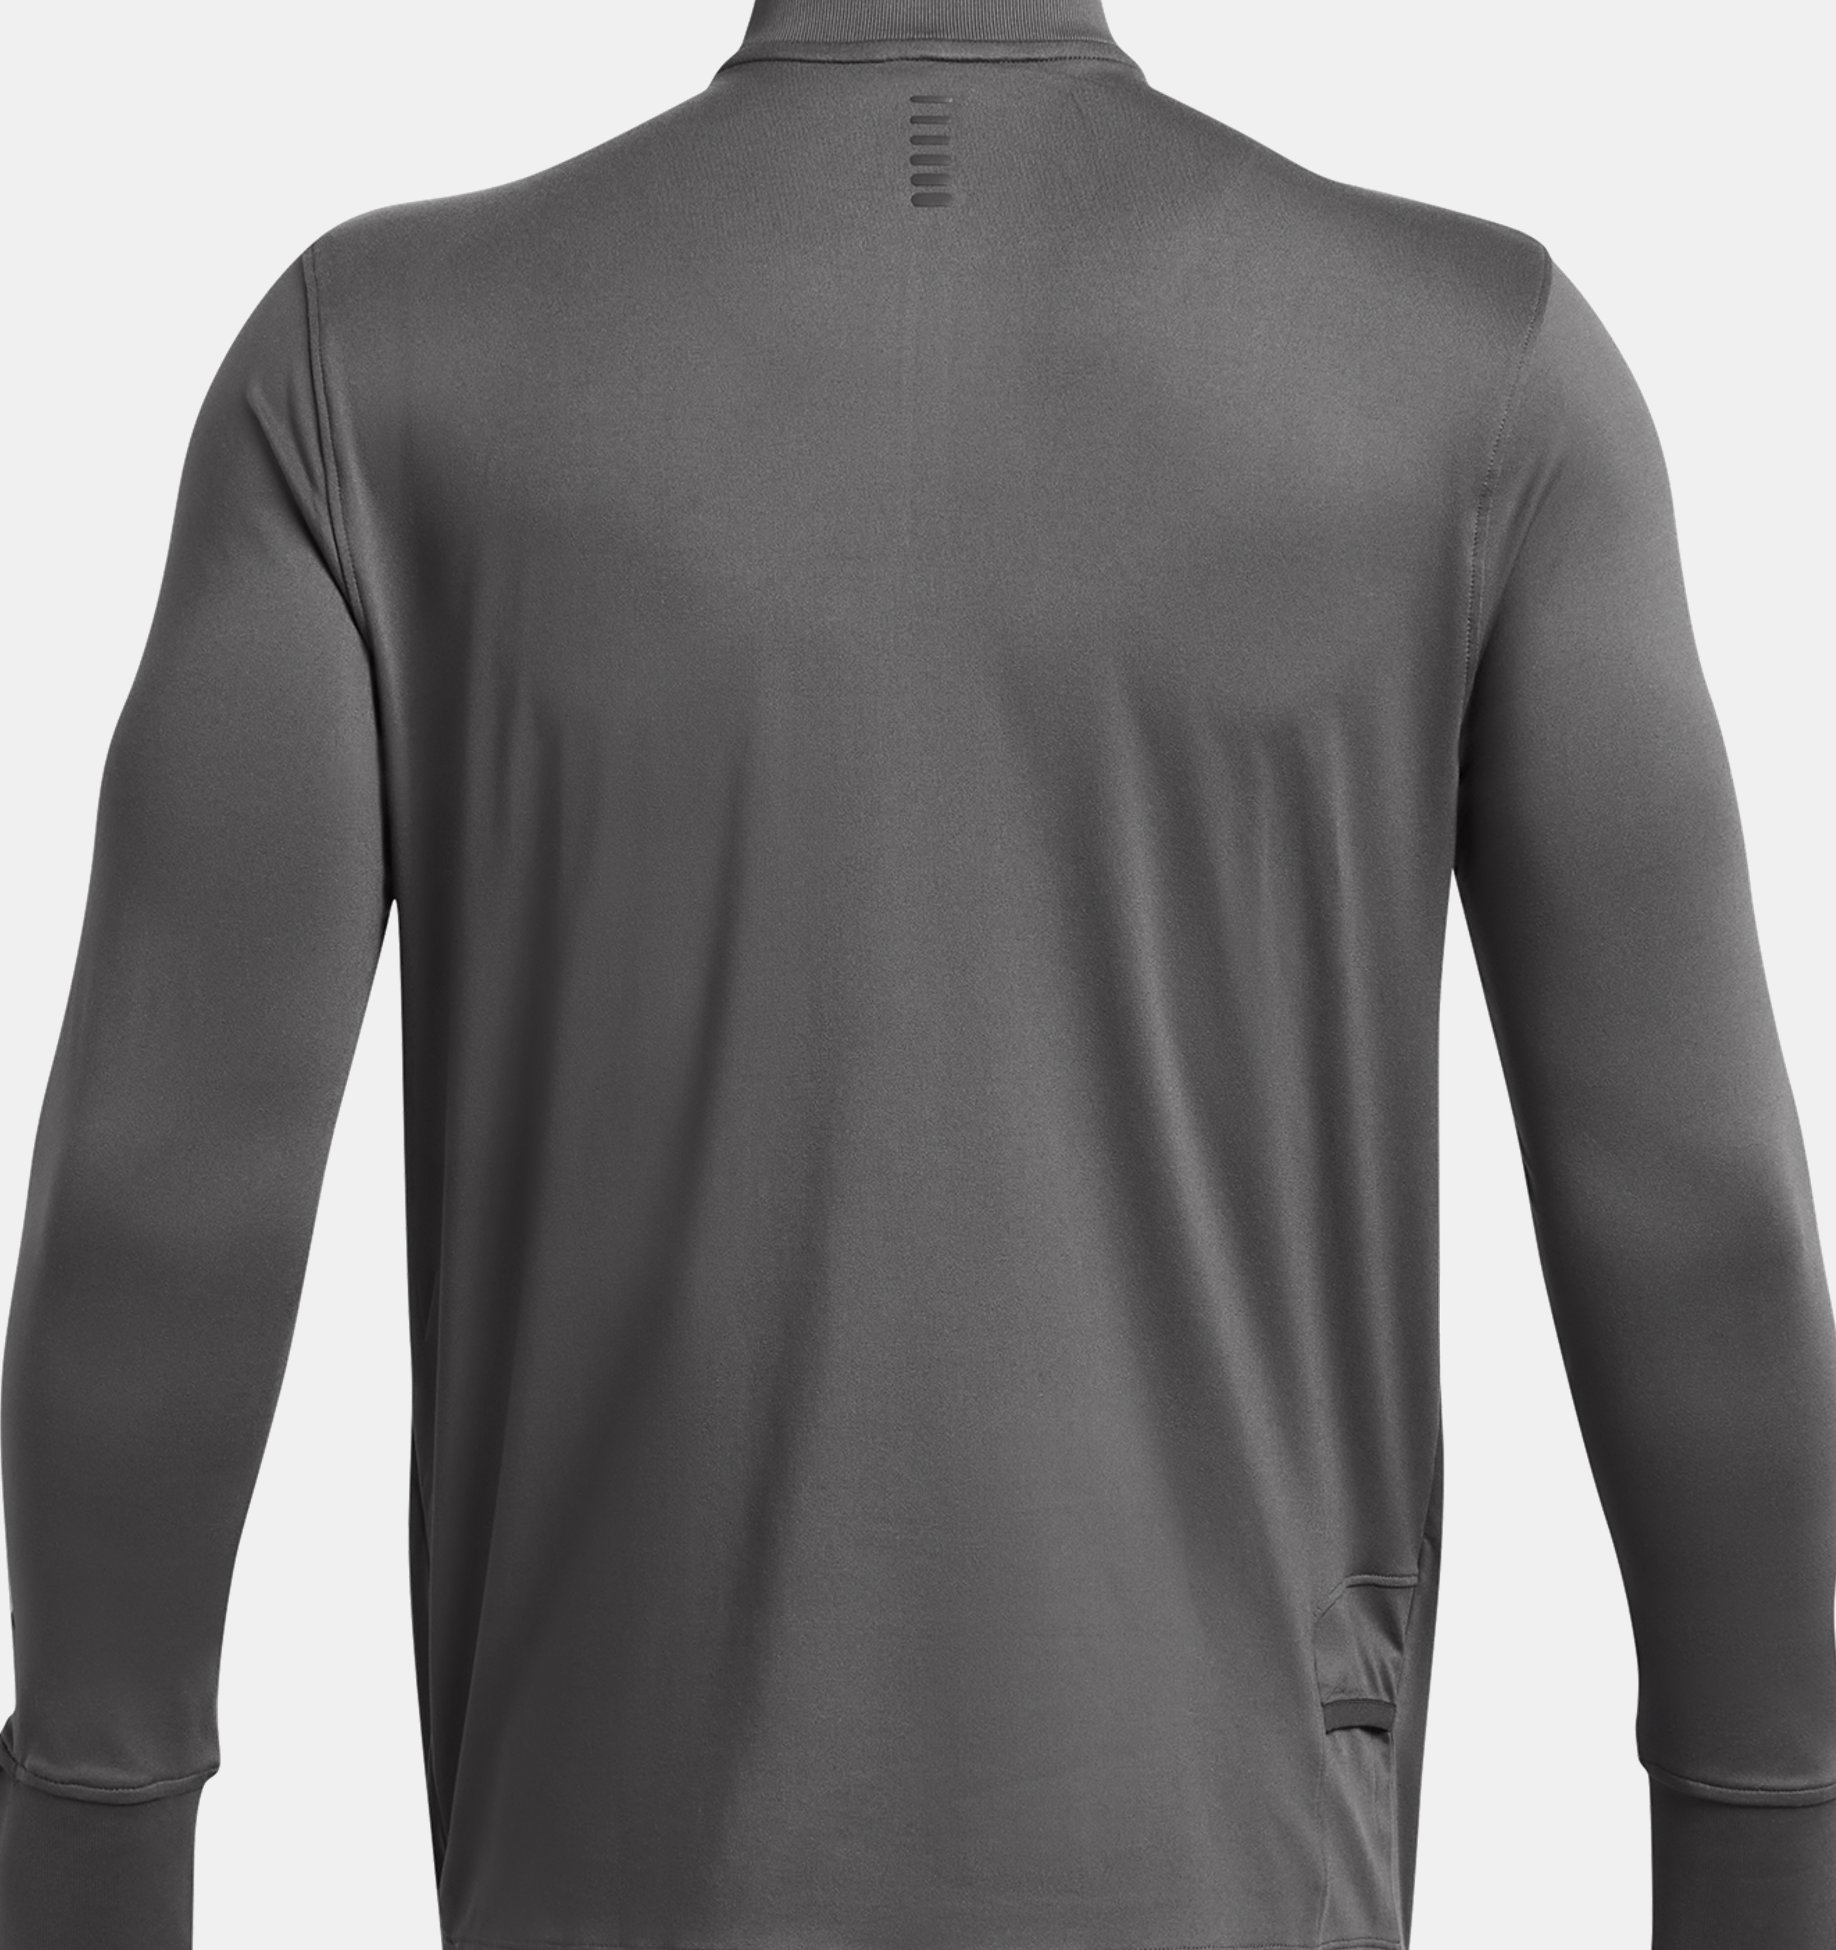 https://underarmour.scene7.com/is/image/Underarmour/PS1379288-025_HB?rp=standard-0pad|pdpZoomDesktop&scl=0.72&fmt=jpg&qlt=85&resMode=sharp2&cache=on,on&bgc=f0f0f0&wid=1836&hei=1950&size=1500,1500